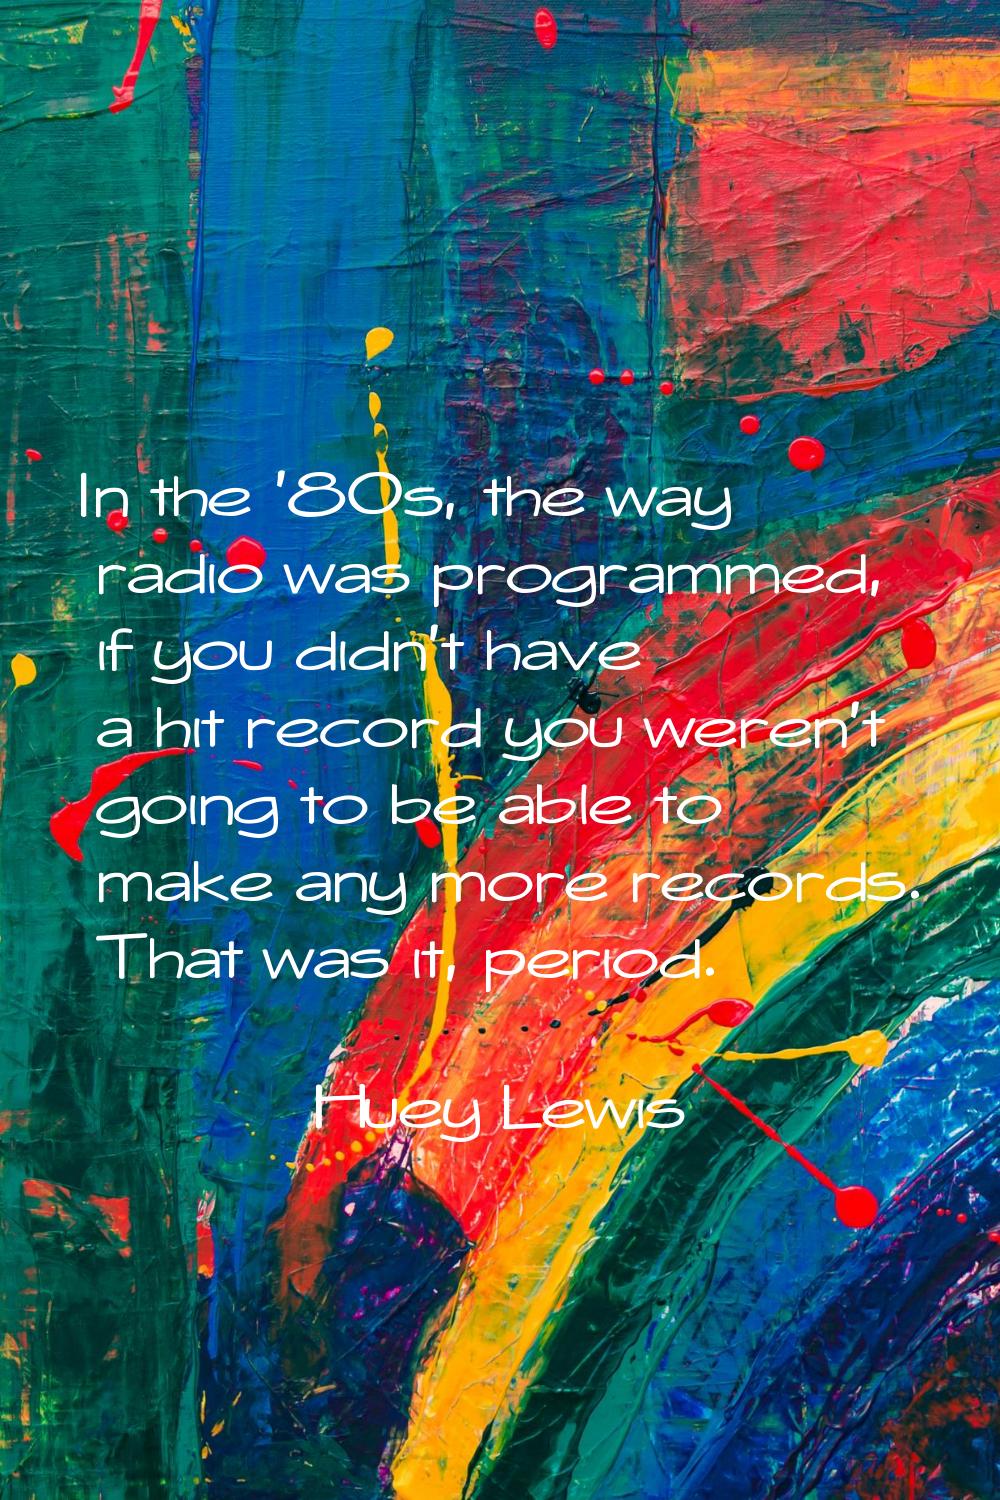 In the '80s, the way radio was programmed, if you didn't have a hit record you weren't going to be 